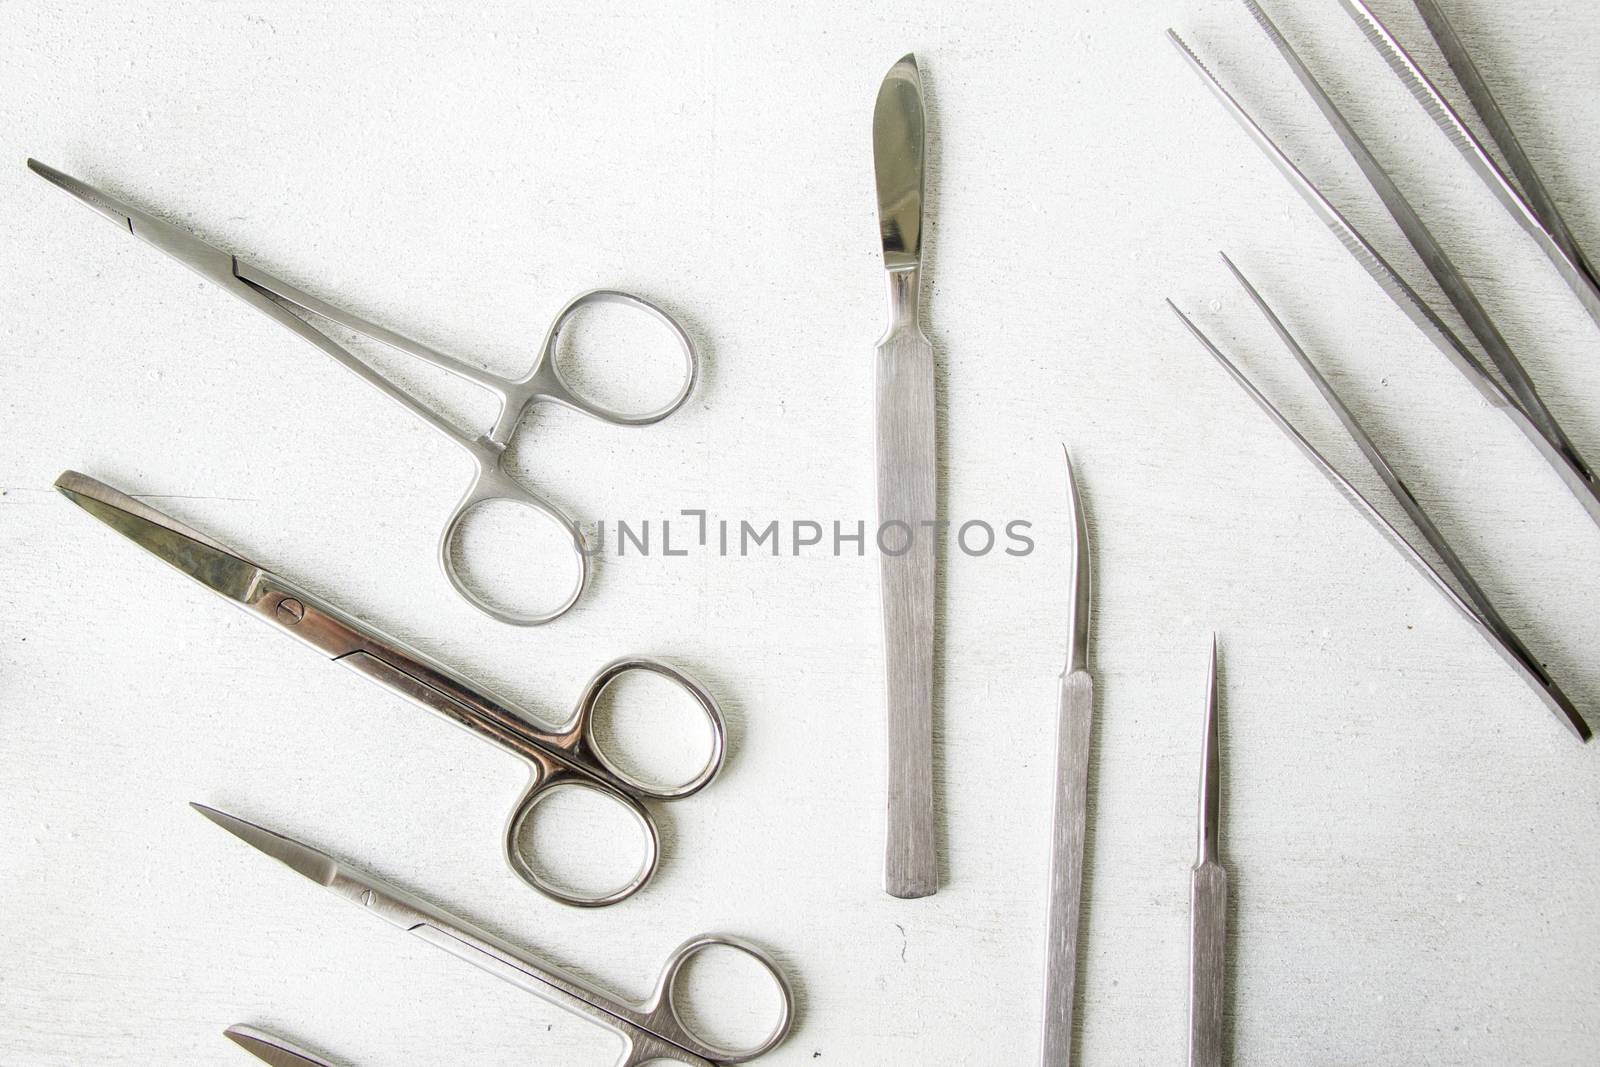 Dissection Kit - Premium Quality Stainless Steel Tools for Medical Students of Anatomy, Biology, Veterinary, Marine Biology by Taidundua